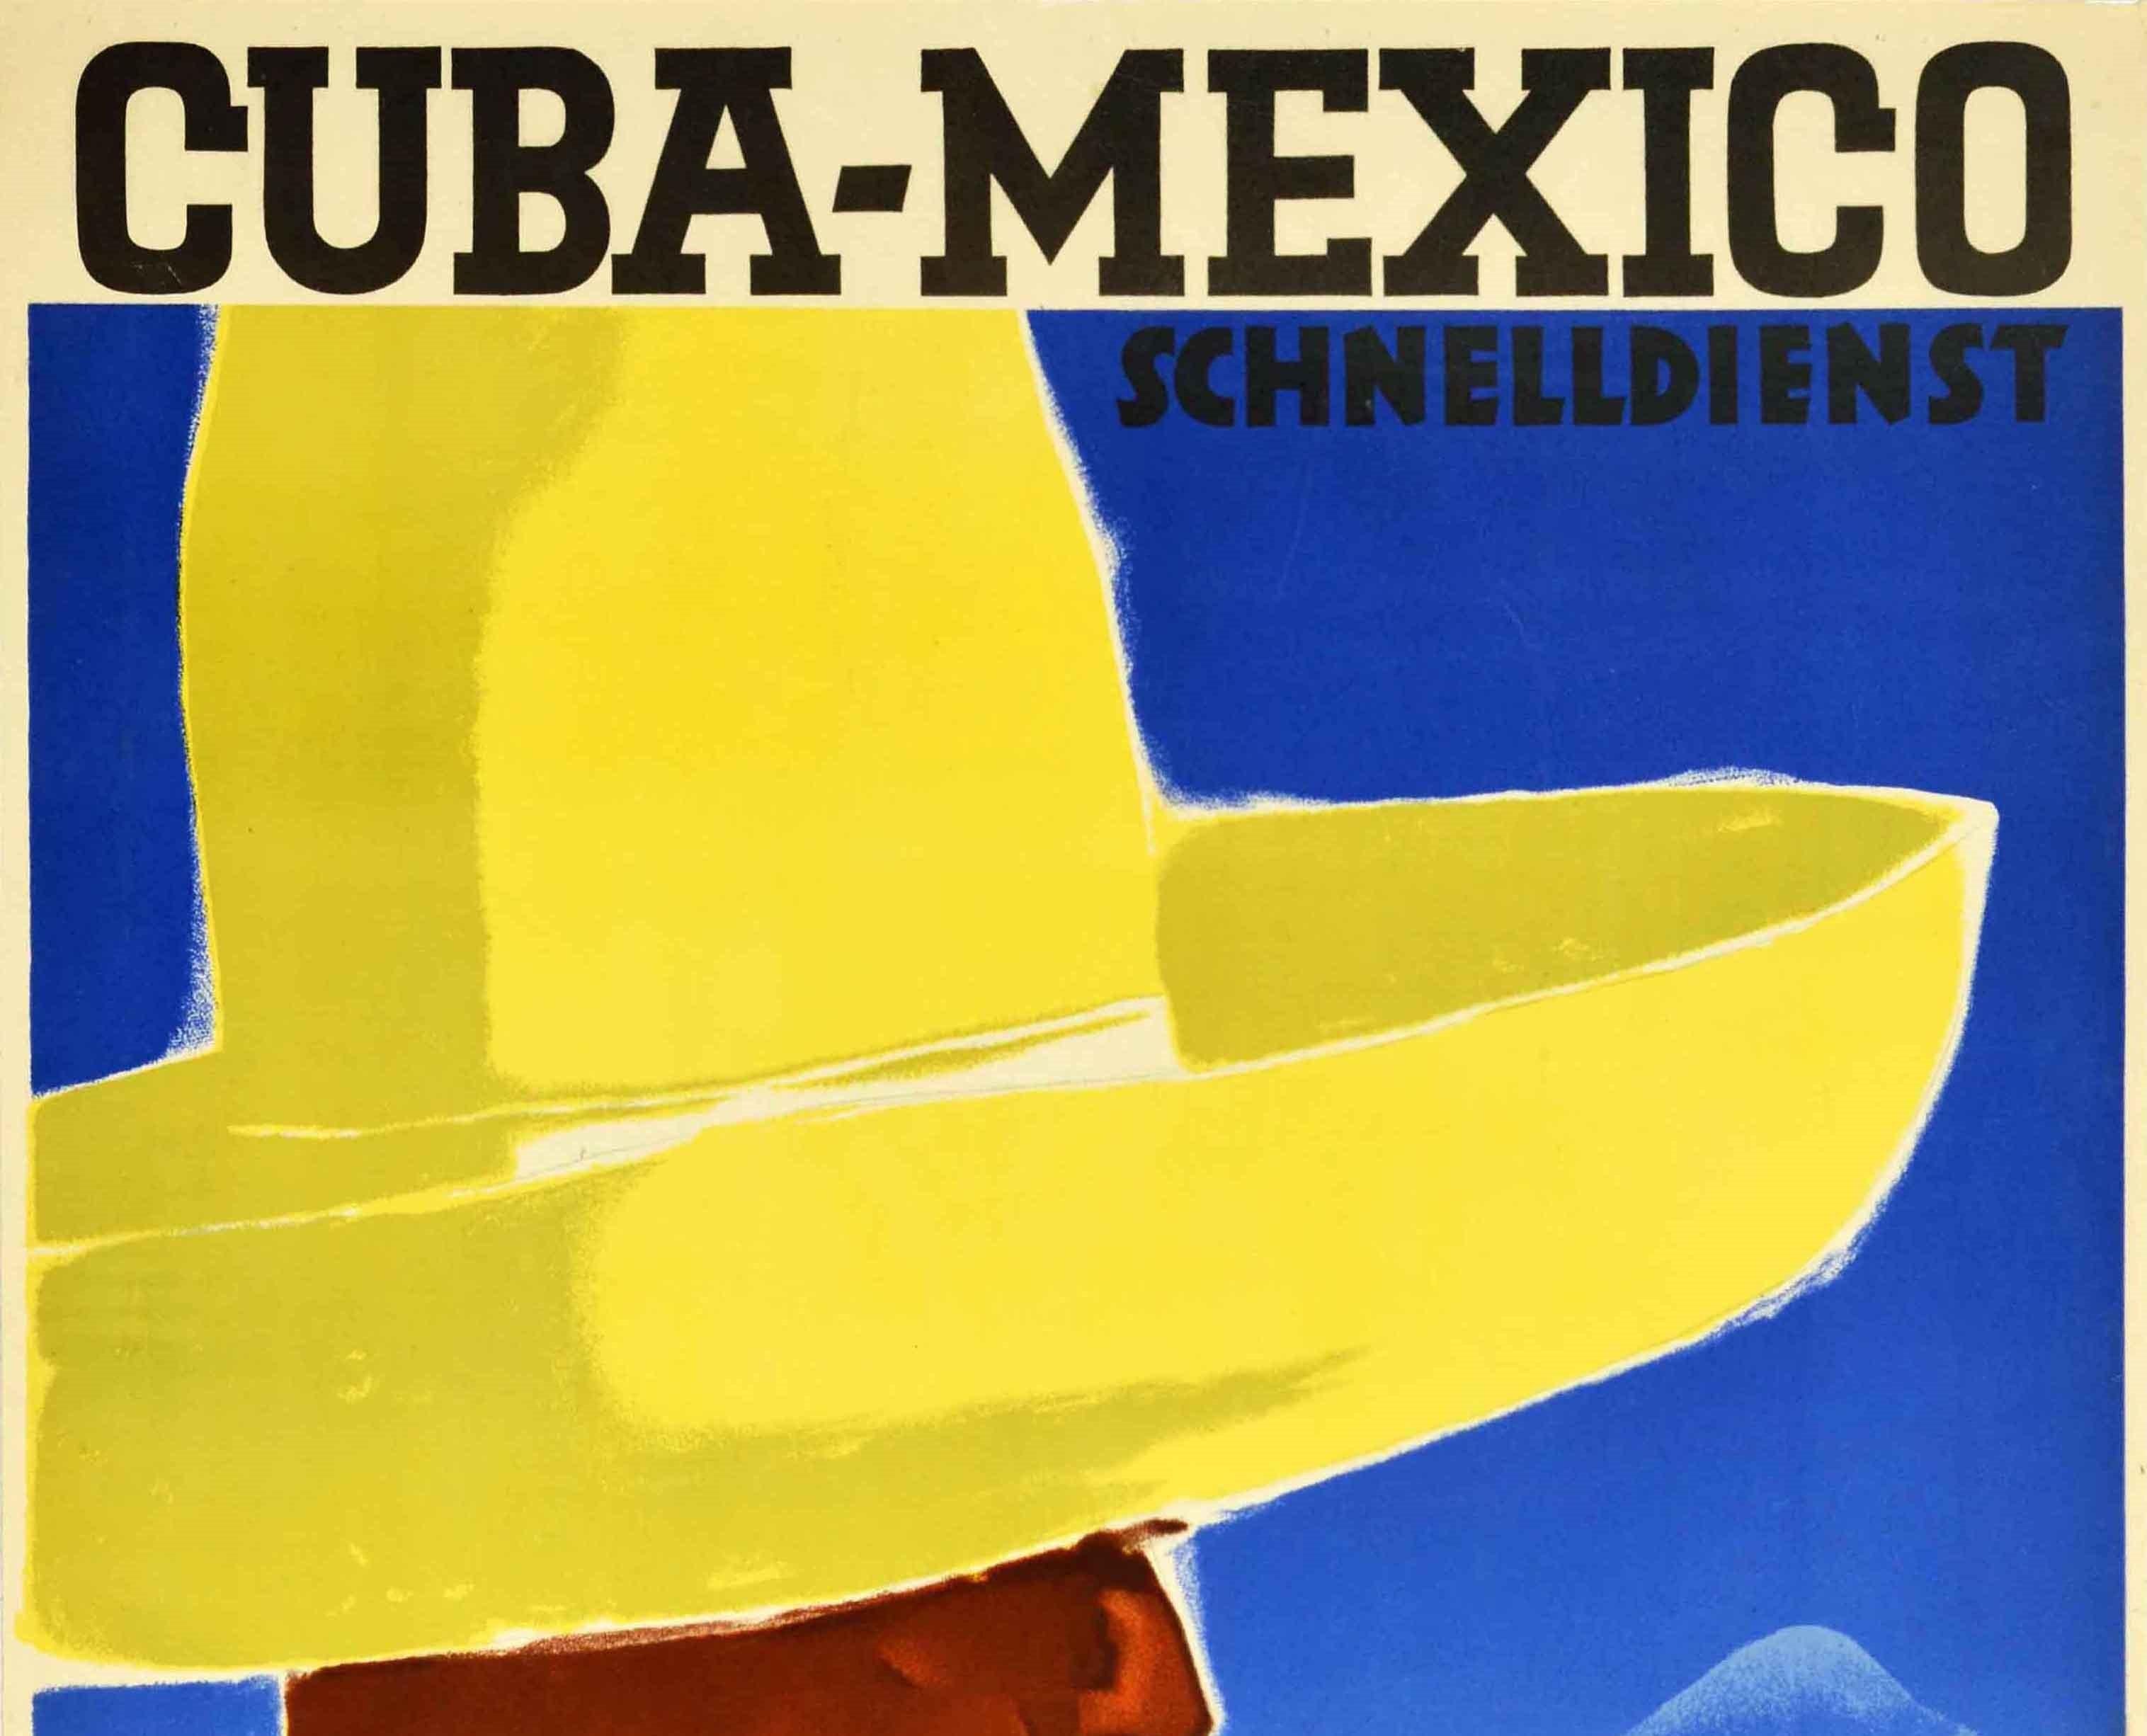 Original vintage travel poster advertising express cruise trips - Cuba Mexico Schnelldienst Norddeutscher Lloyd Bremen - featuring a colourful illustration of a man in a traditional yellow hat with a large earring and wearing colourful clothing